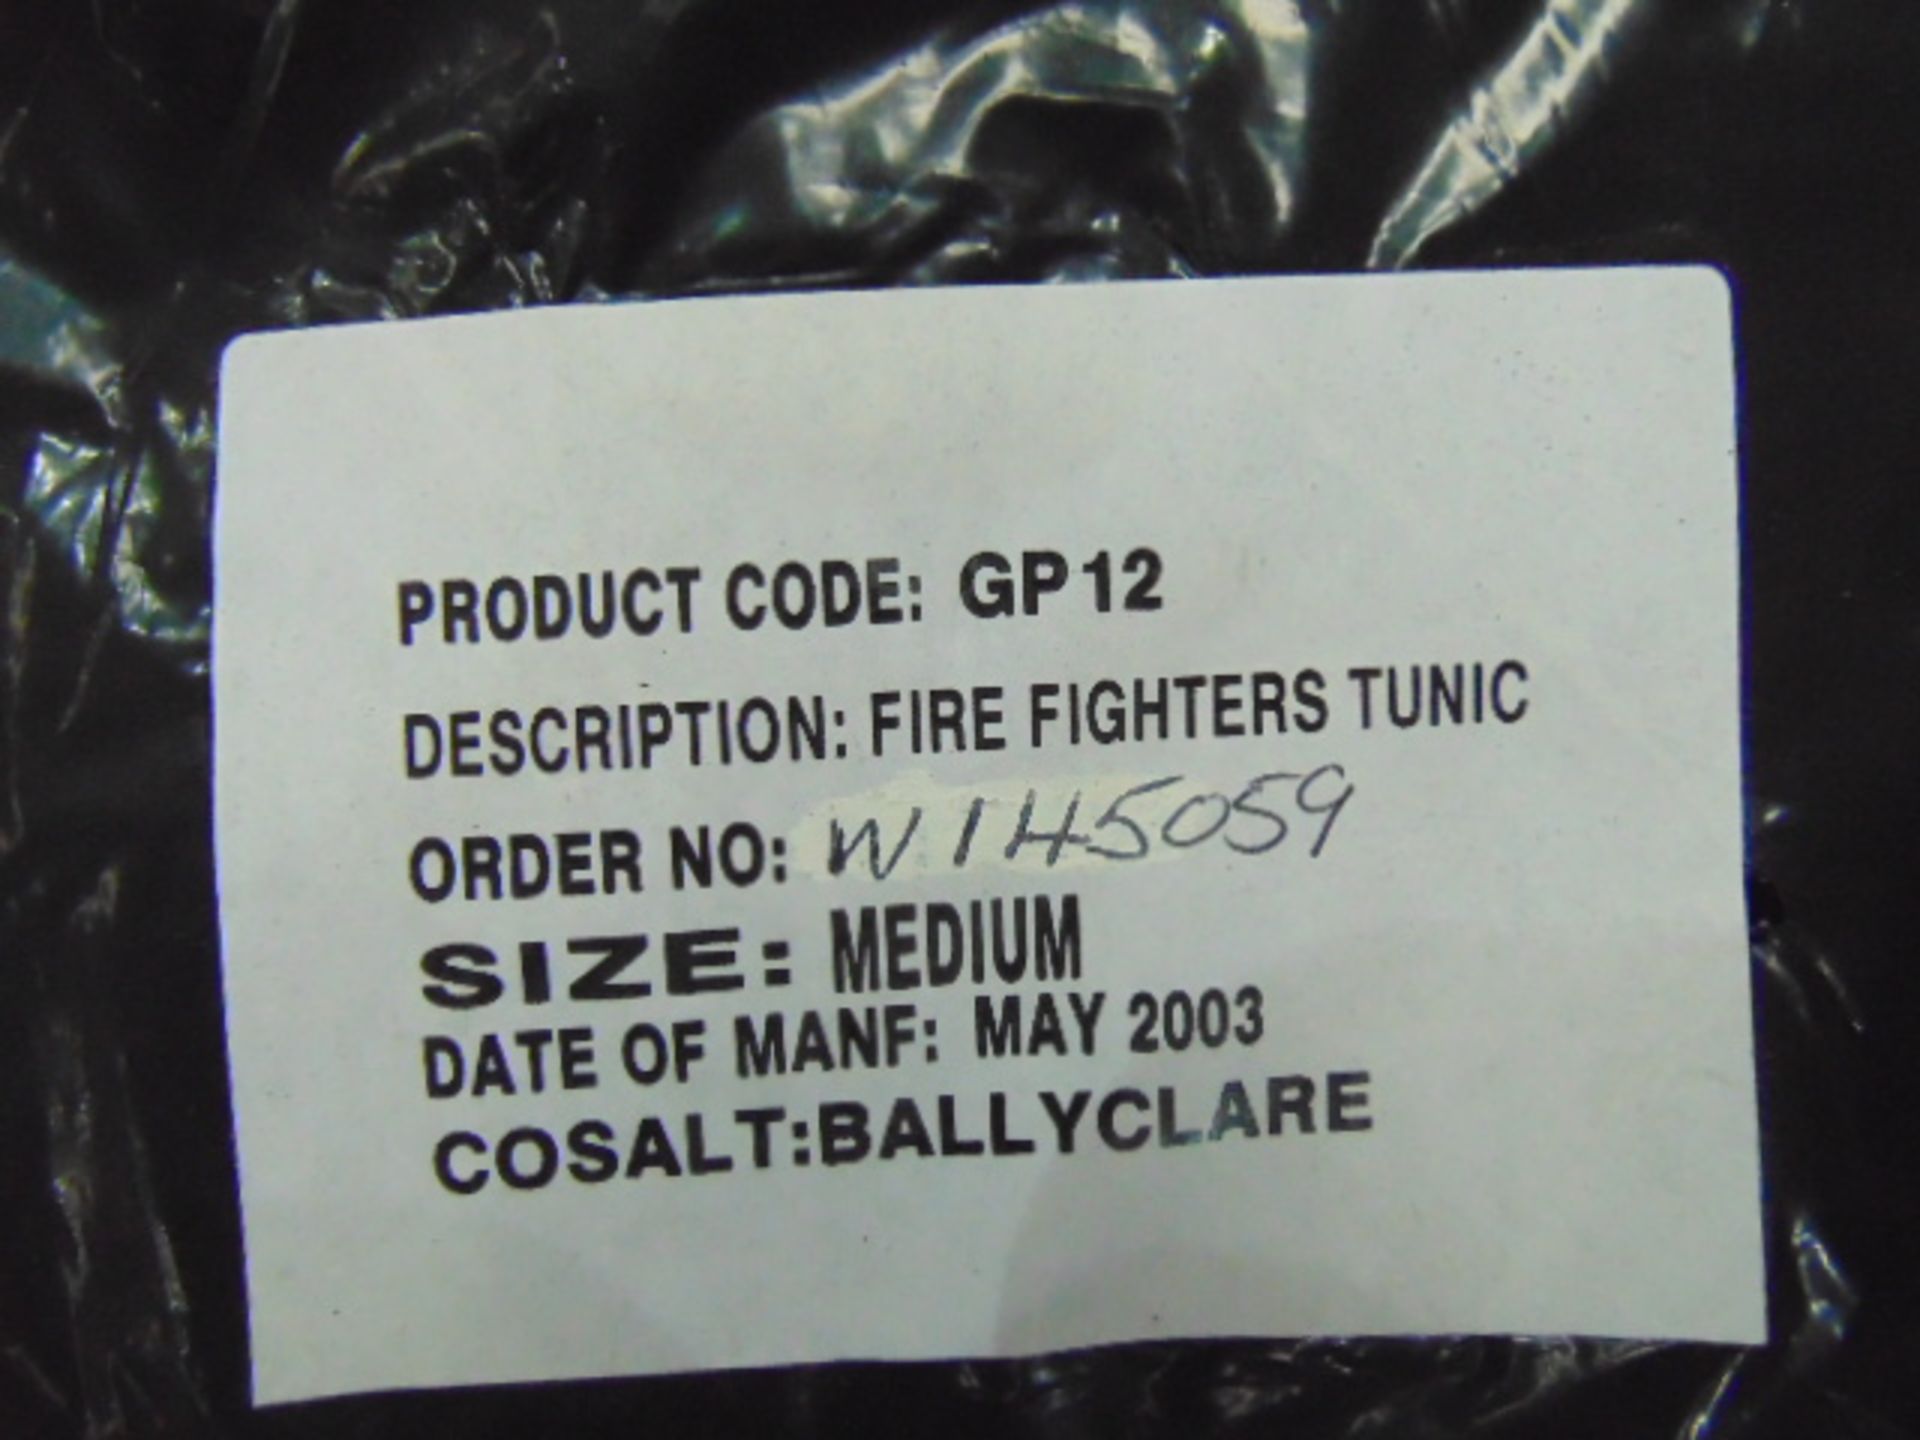 2 x Unissued Ballyclare Firefighters Jackets Size Medium - Image 7 of 7